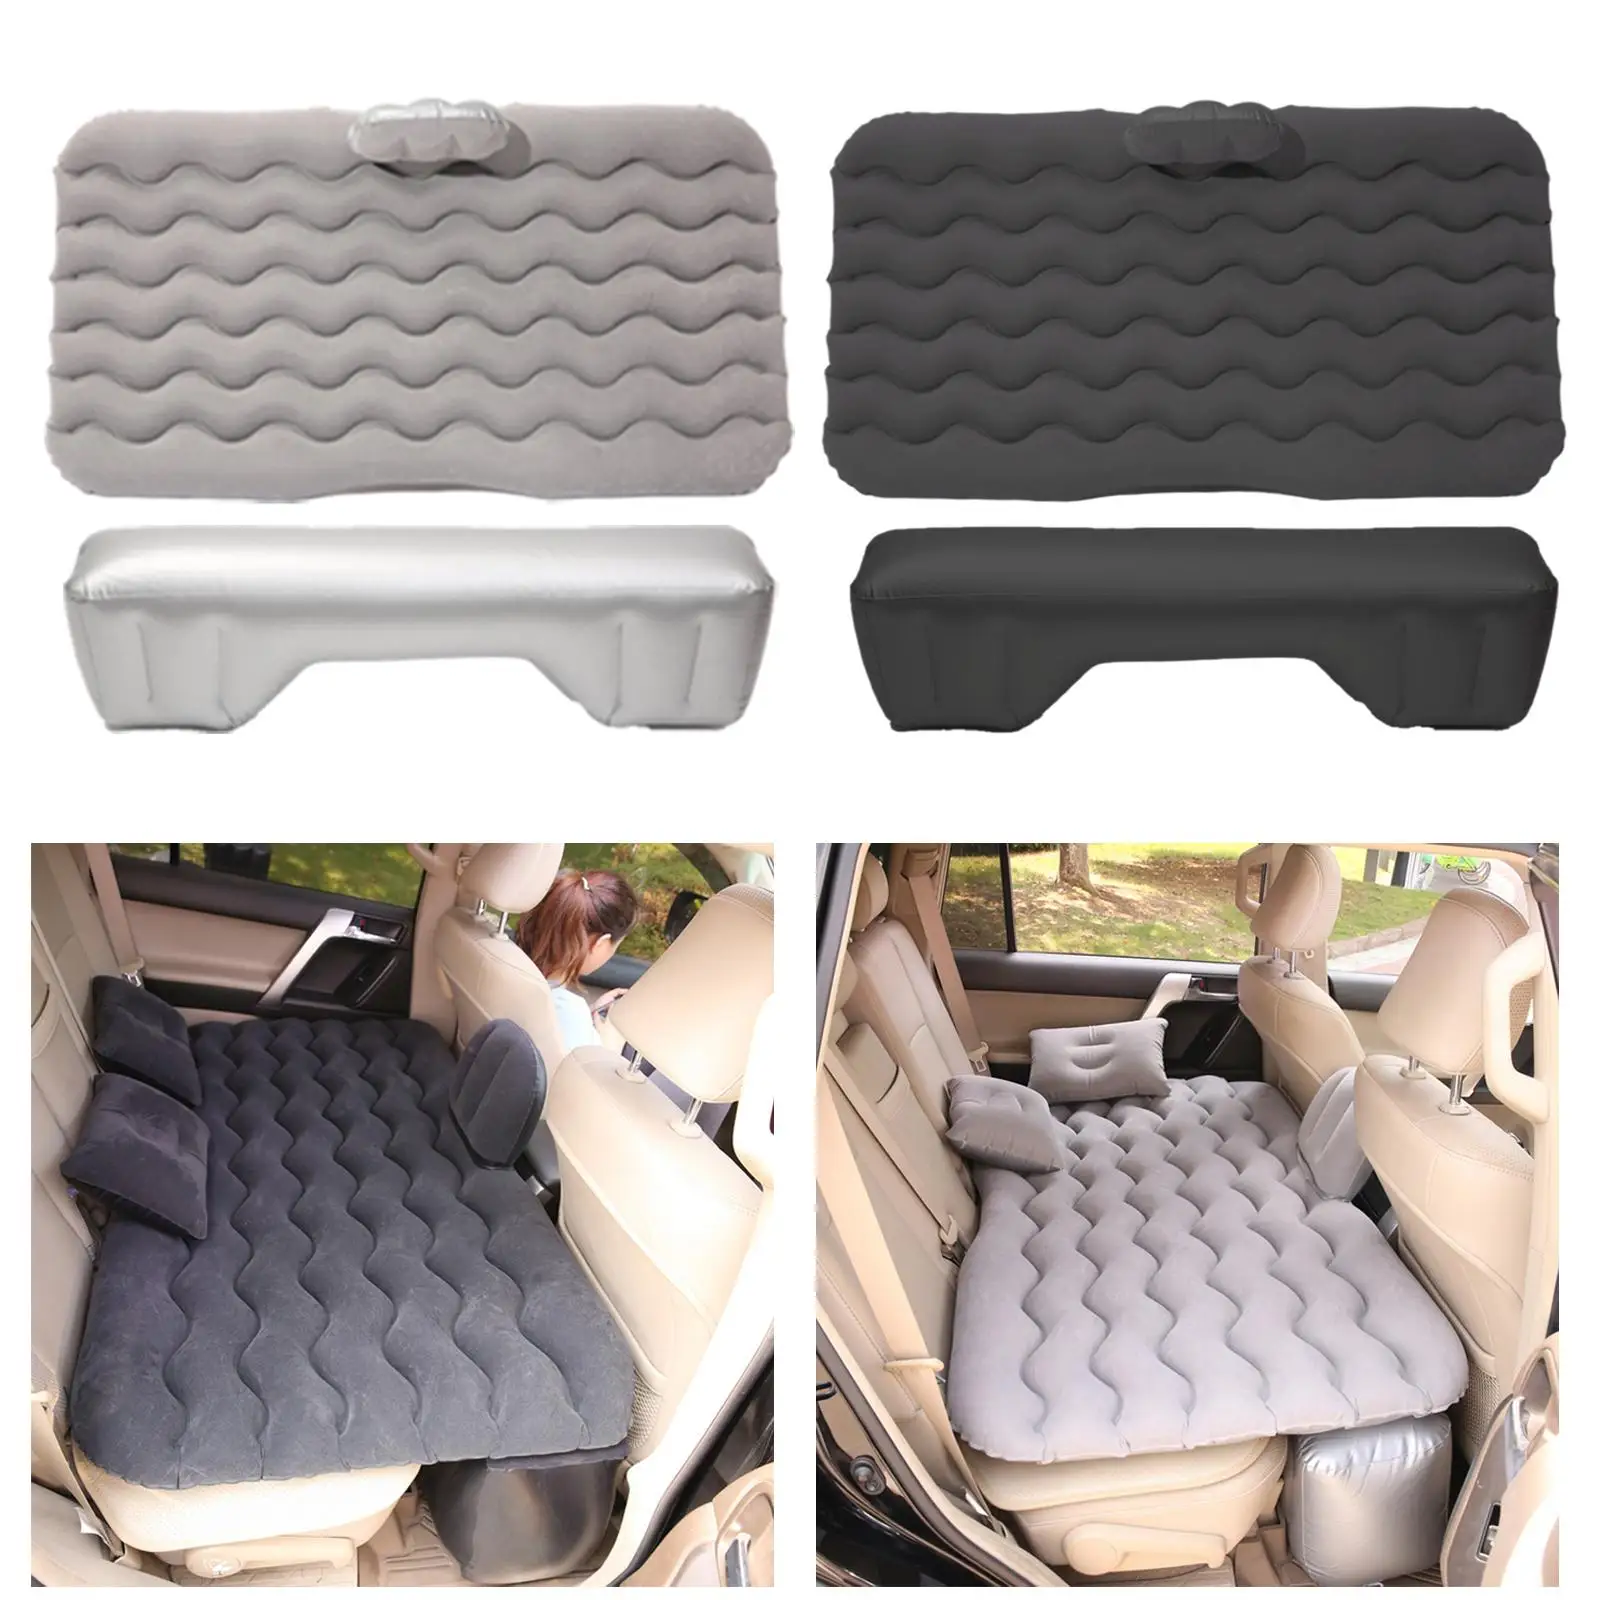 Rear Seat Air Mattress Inflatable Rest Cushion Sleeping Bed Pad Air Couch Mat for Tent Going Out Hiking Camping Truck RV Sedan